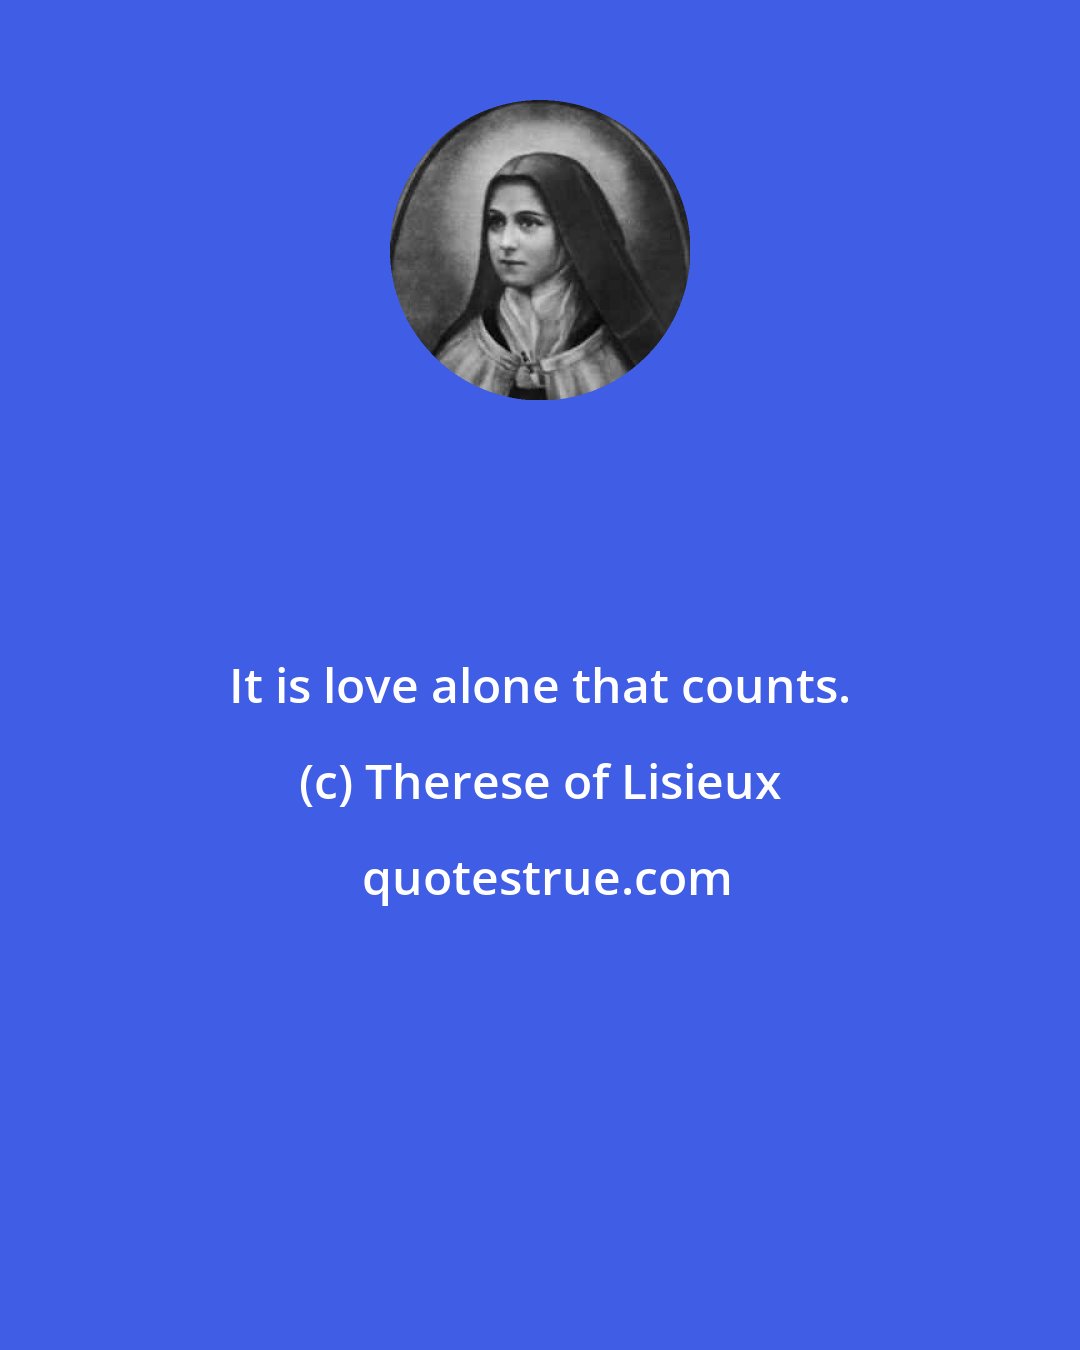 Therese of Lisieux: It is love alone that counts.